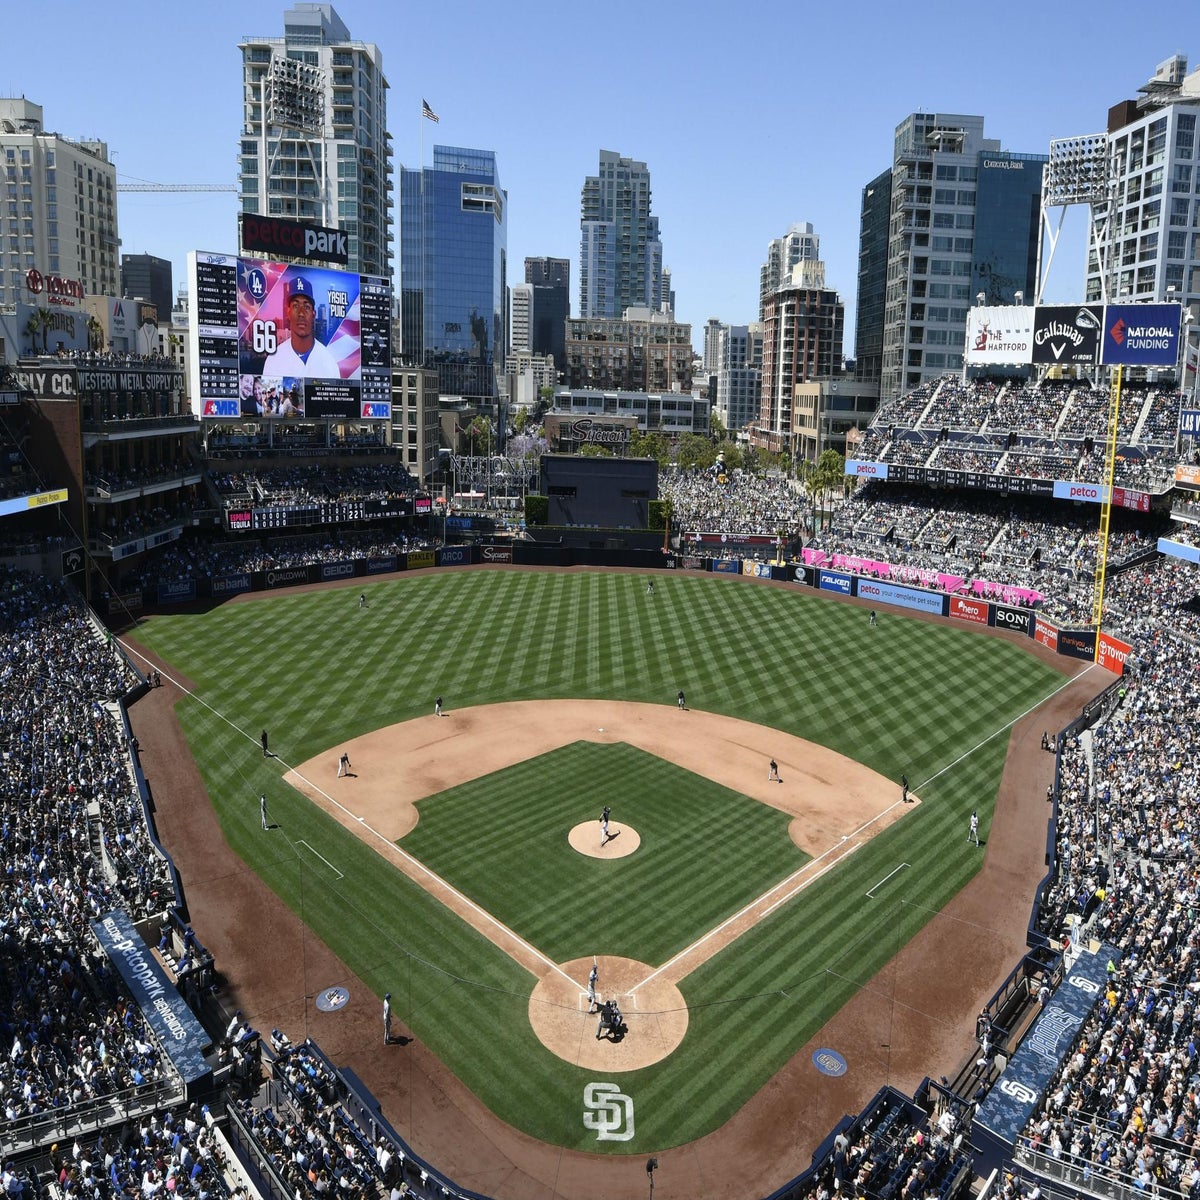 MLB to investigate national anthem mishap at Padres game